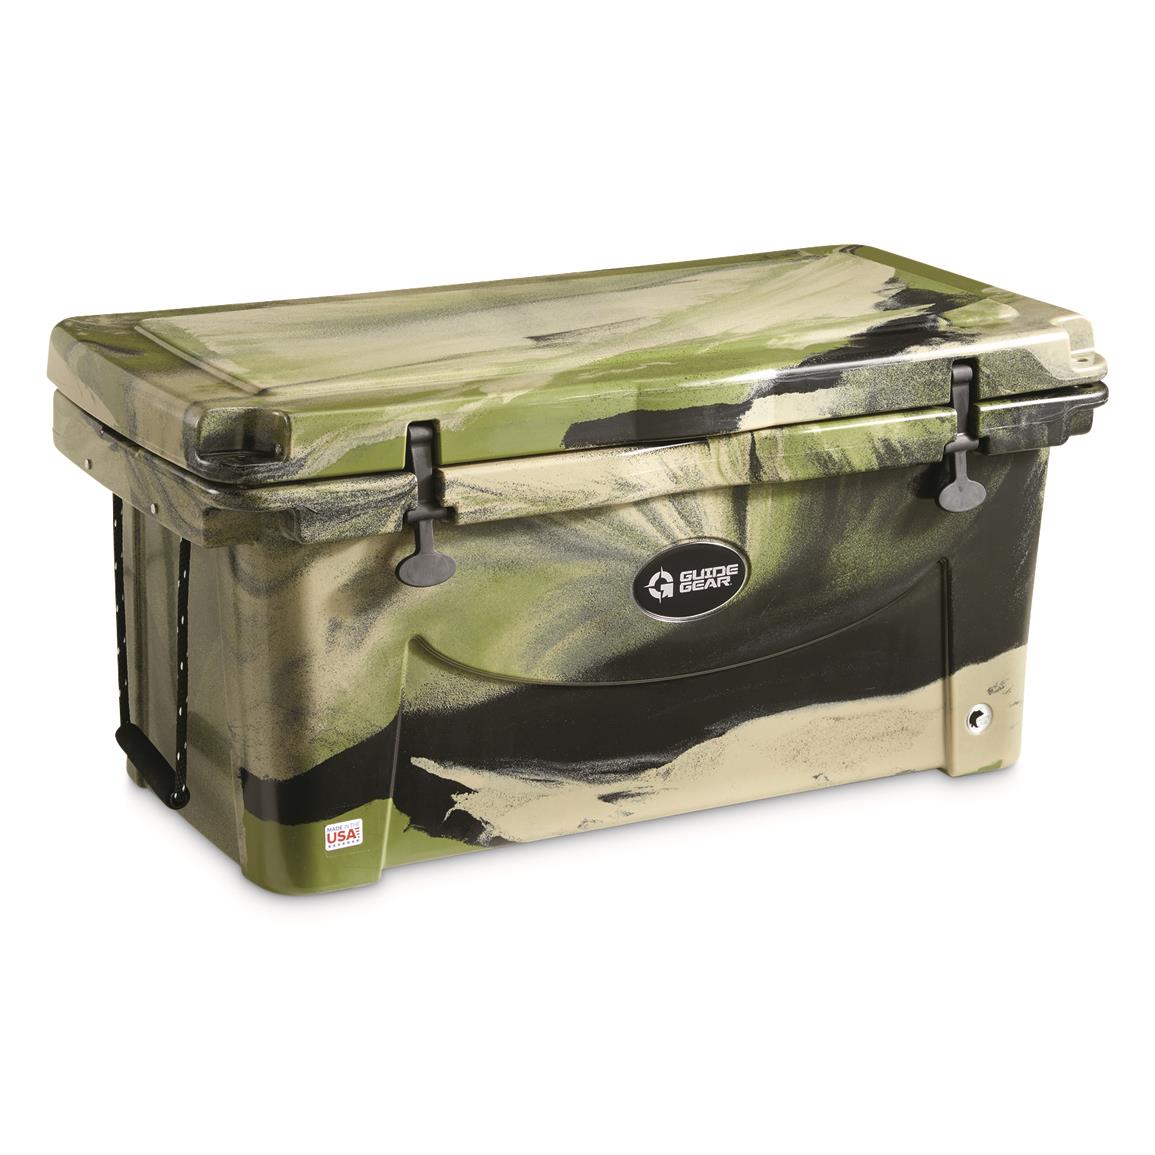 Guide Gear 90 Quart Cooler, Painted Forest